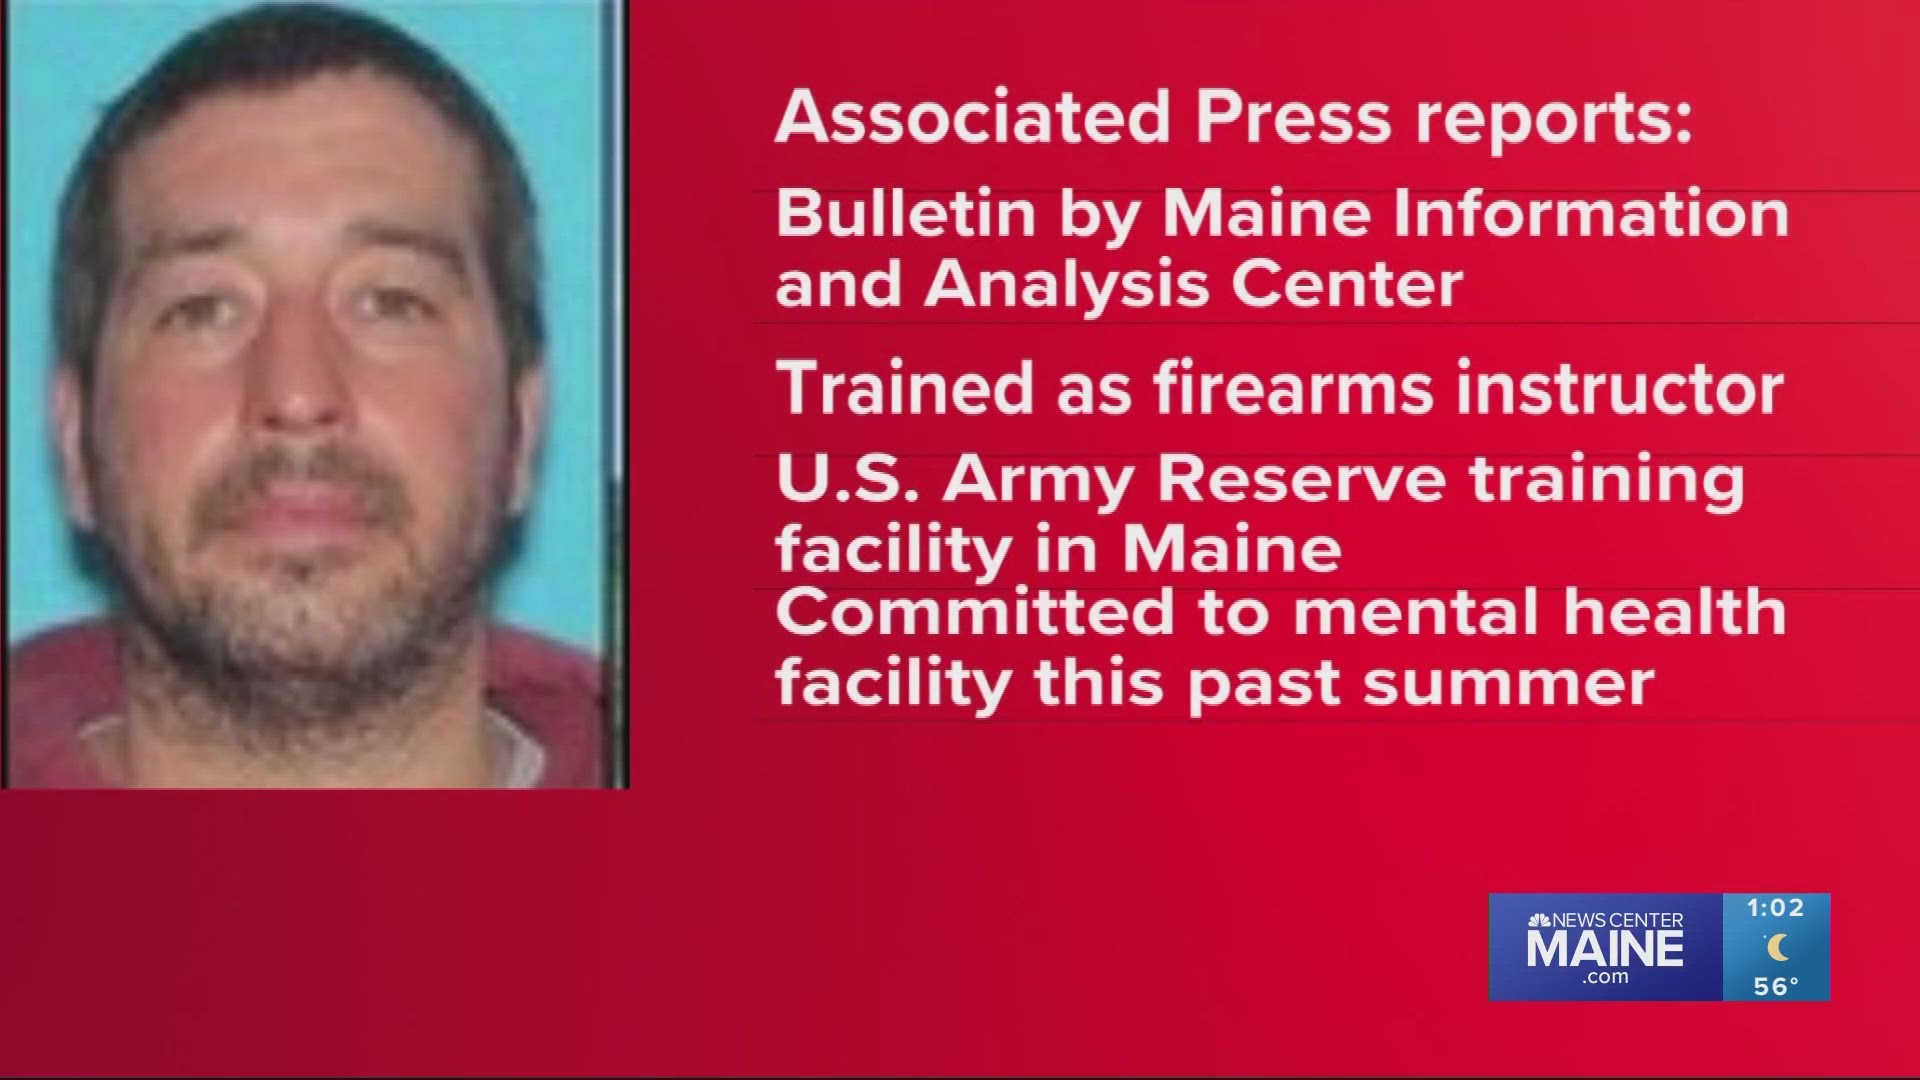 A police intelligence bulletin identified Robert Card, who was trained as a firearms instructor at a U.S. Army Reserve training facility, as the person of interest.